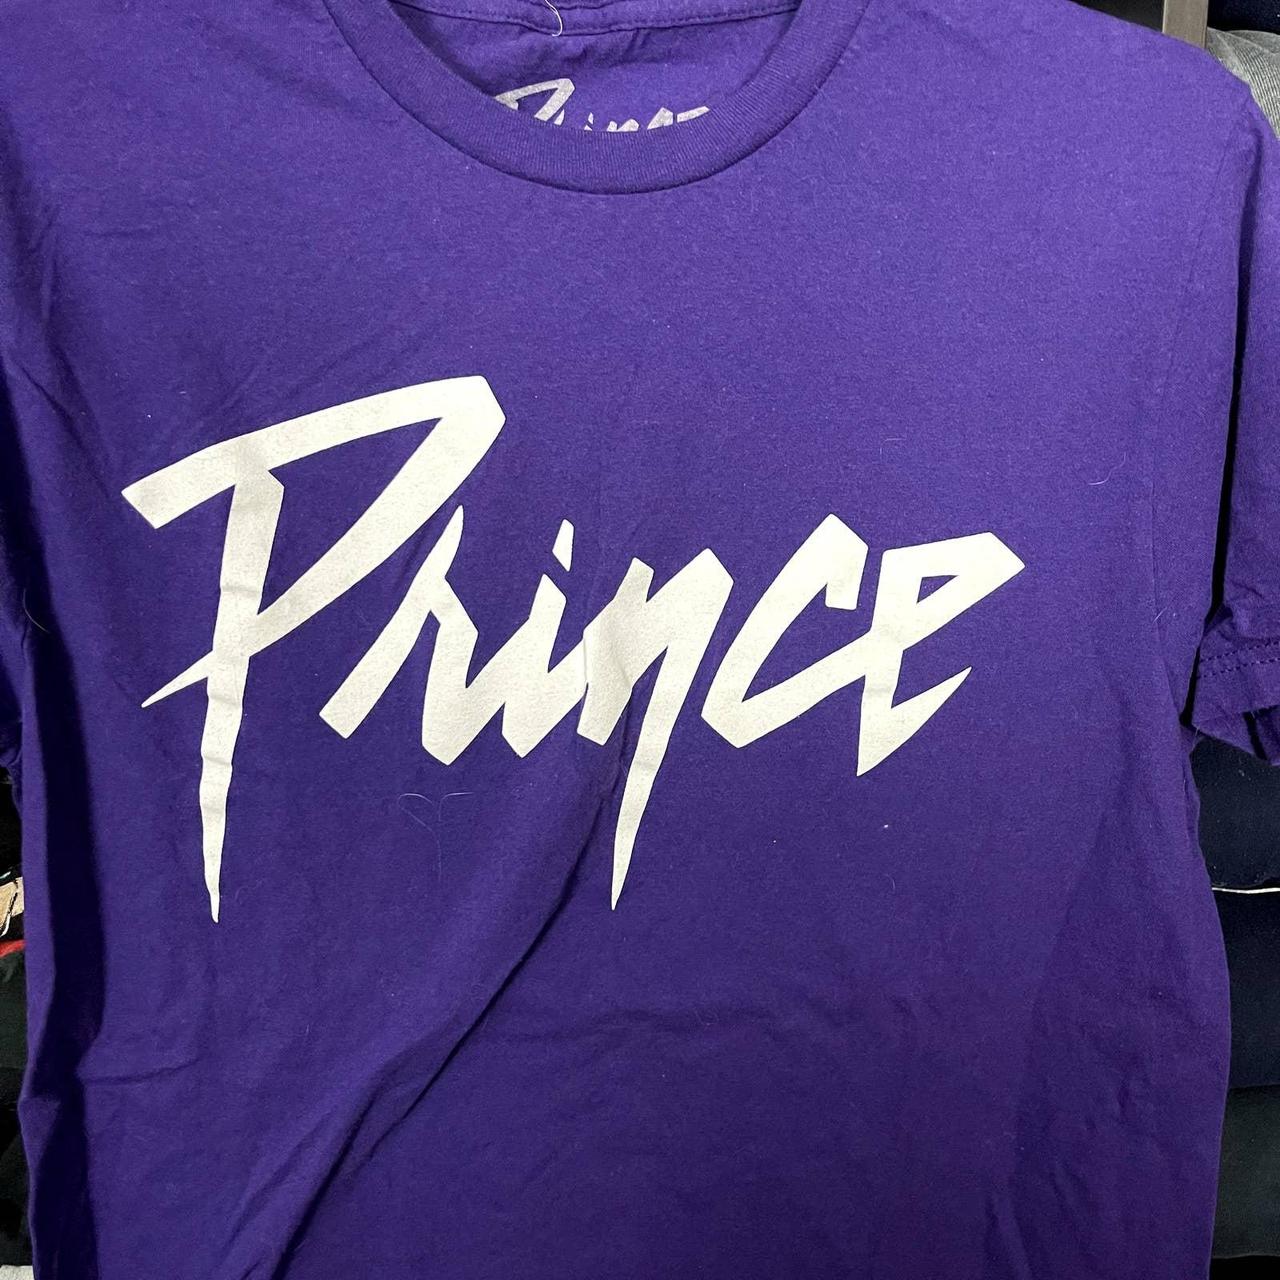 Product Image 2 - Prince Band Shirt

Good condition
Front spell